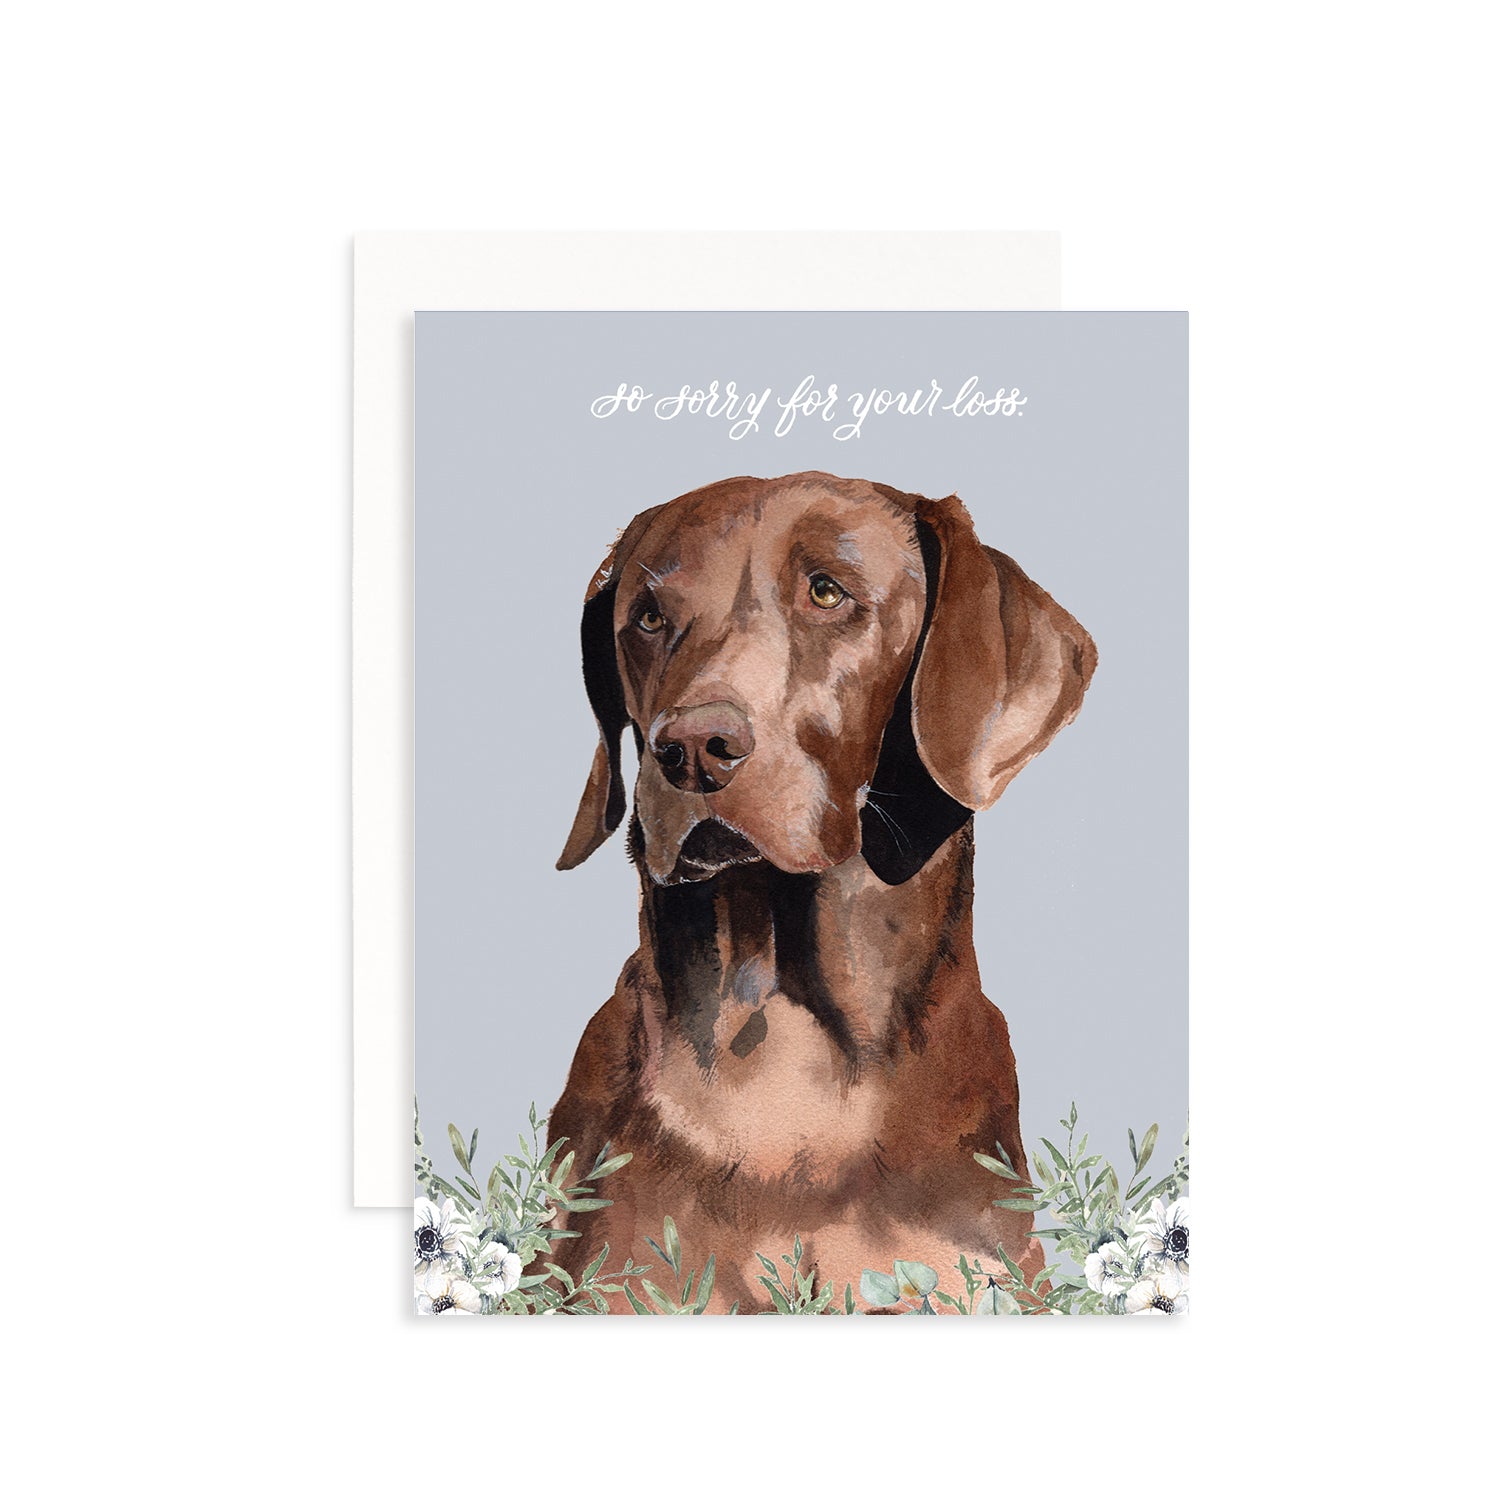 So Sorry for Your Loss (Dog) Greeting Card